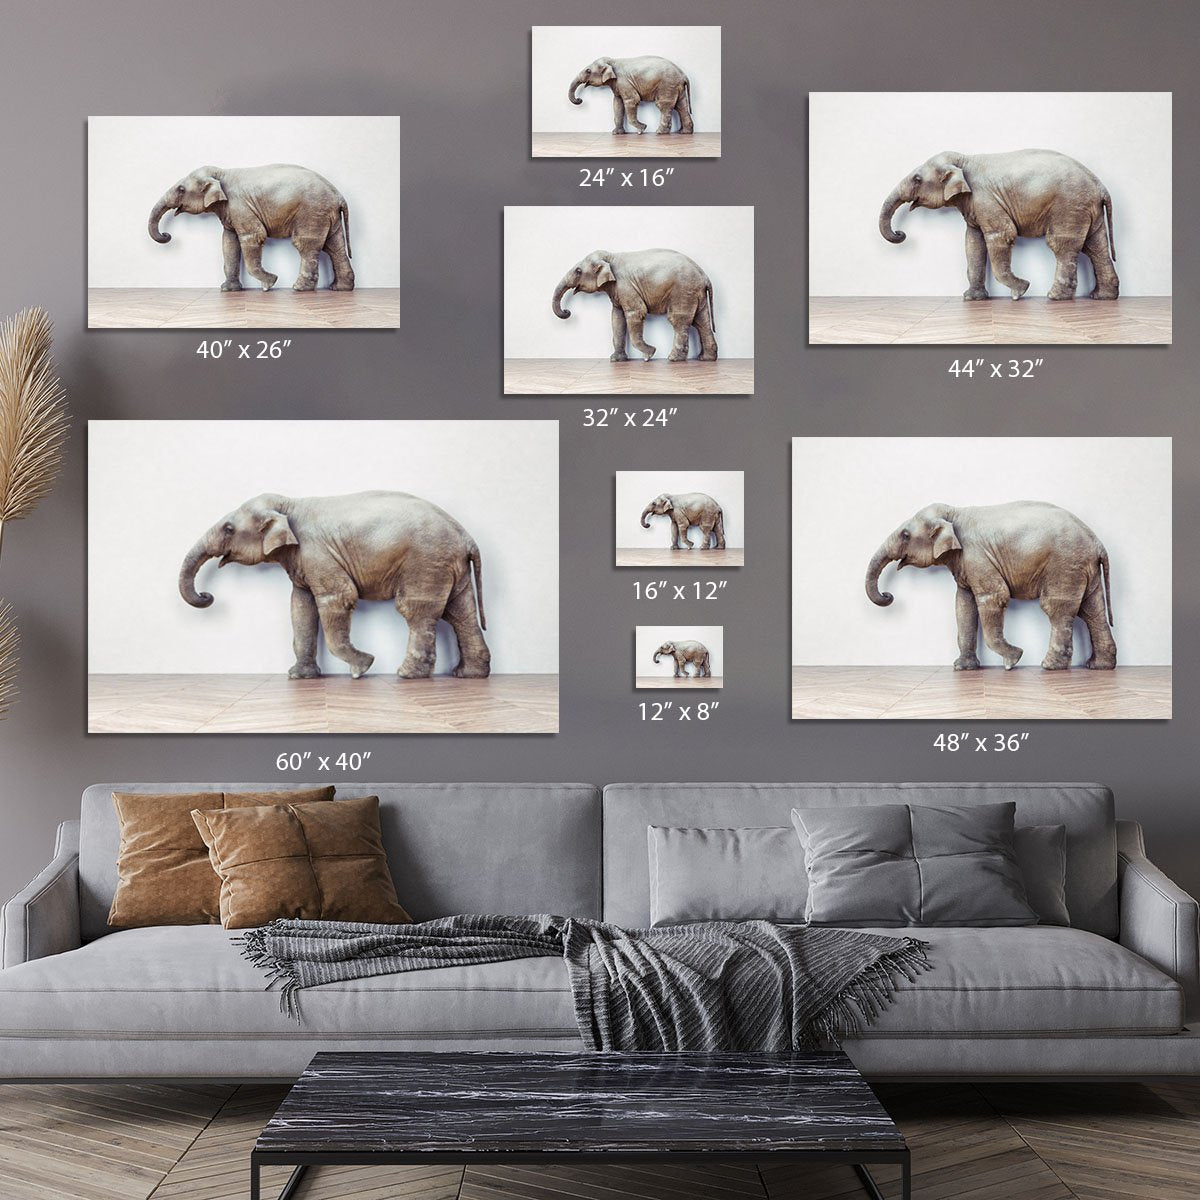 The elephant calm in the room near white wall Canvas Print or Poster